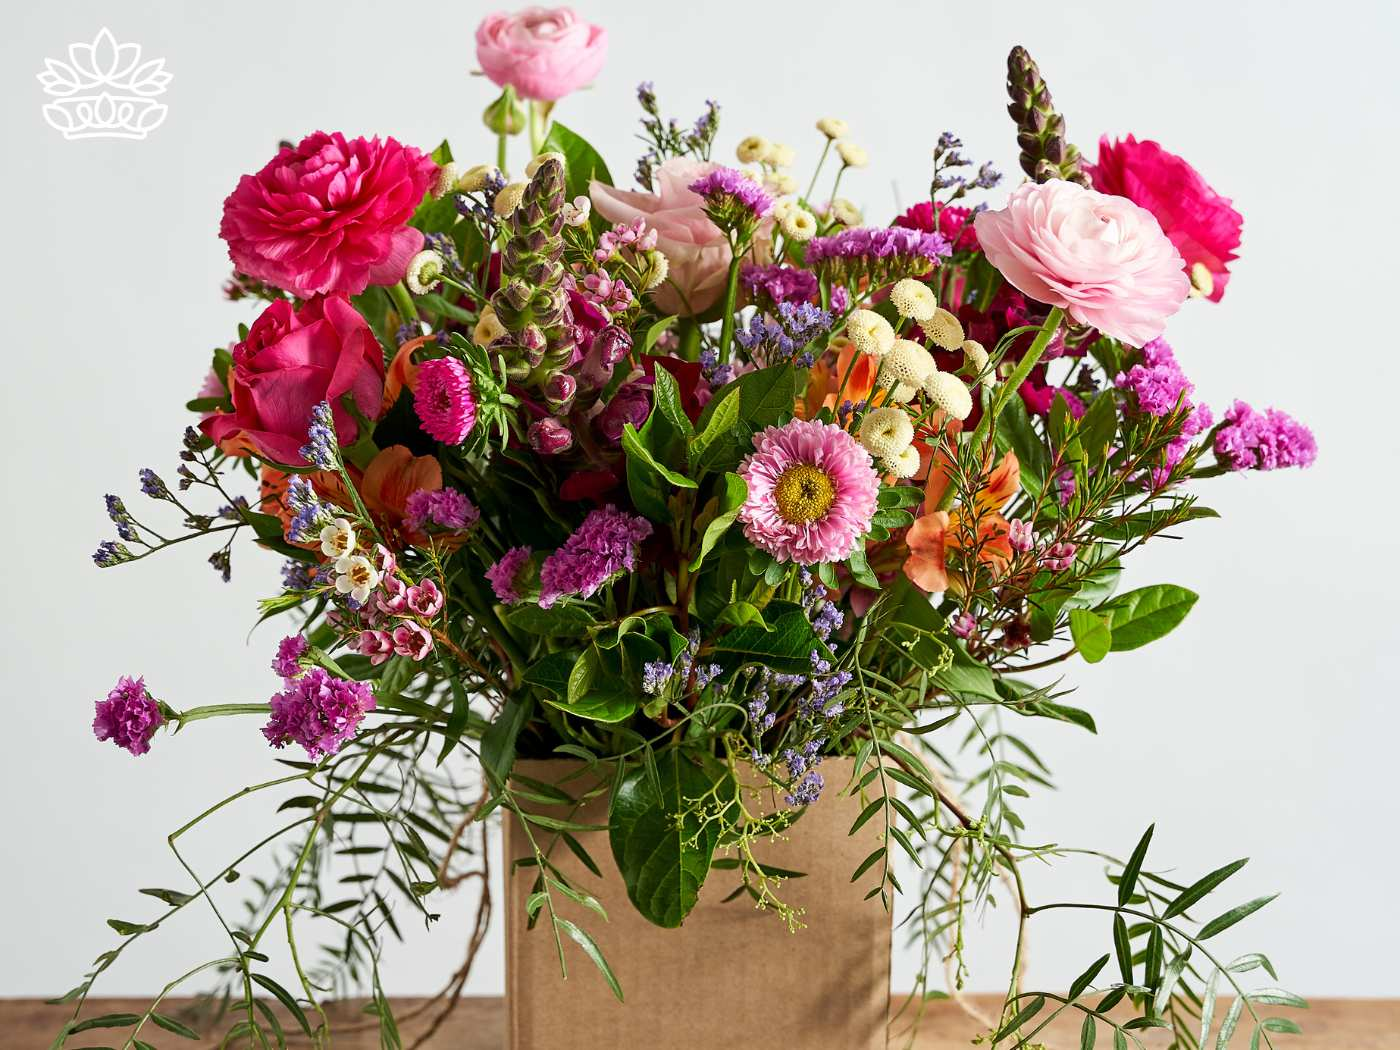 A bright and cheerful floral arrangement featuring a variety of colorful blooms, including pink roses, orange snapdragons, purple statice, and delicate greenery, showcasing creative ideas for gifting. Fabulous Flowers and Gifts. Gifts for Her.